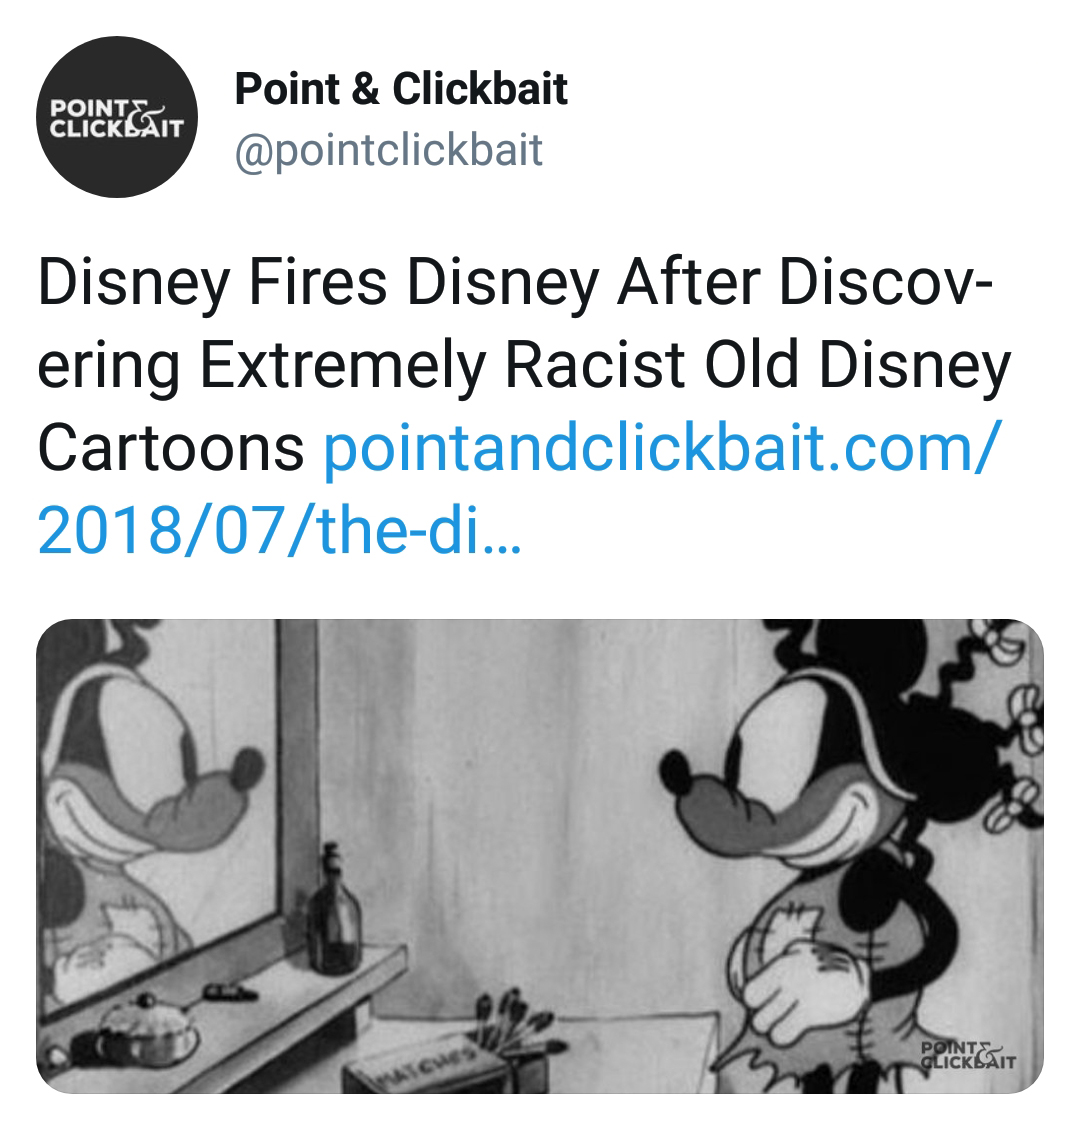 communication - Pointe Clicklait Point & Clickbait Disney Fires Disney After Discov ering Extremely Racist Old Disney Cartoons pointandclickbait.com 201807thedi... Pointe Clicksalt